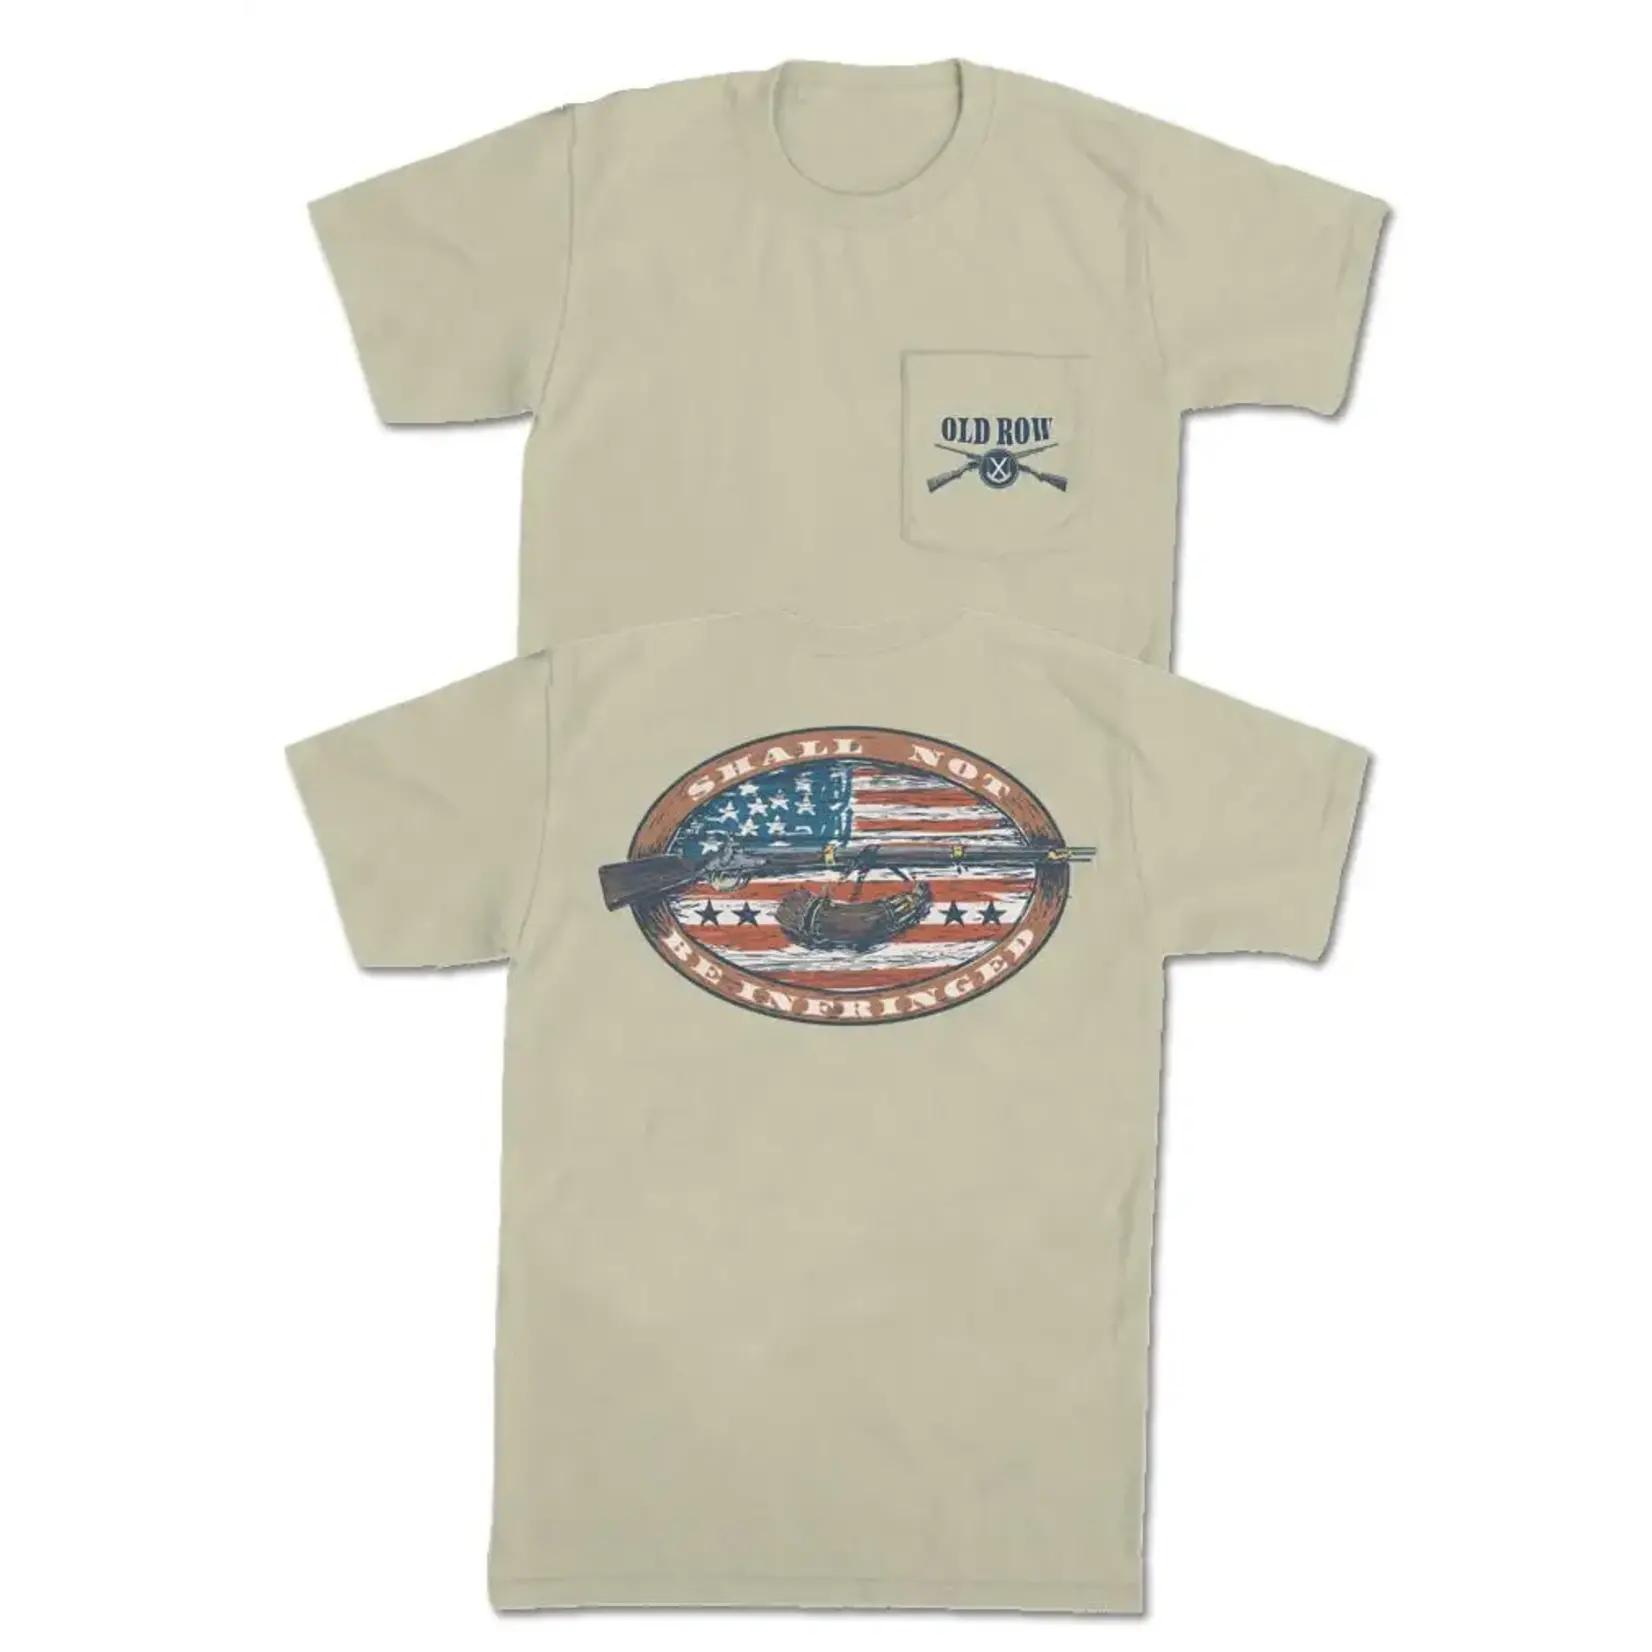 OLD ROW Old Row Outdoors The 2nd Amendment Pocket S/S TEE Shirt